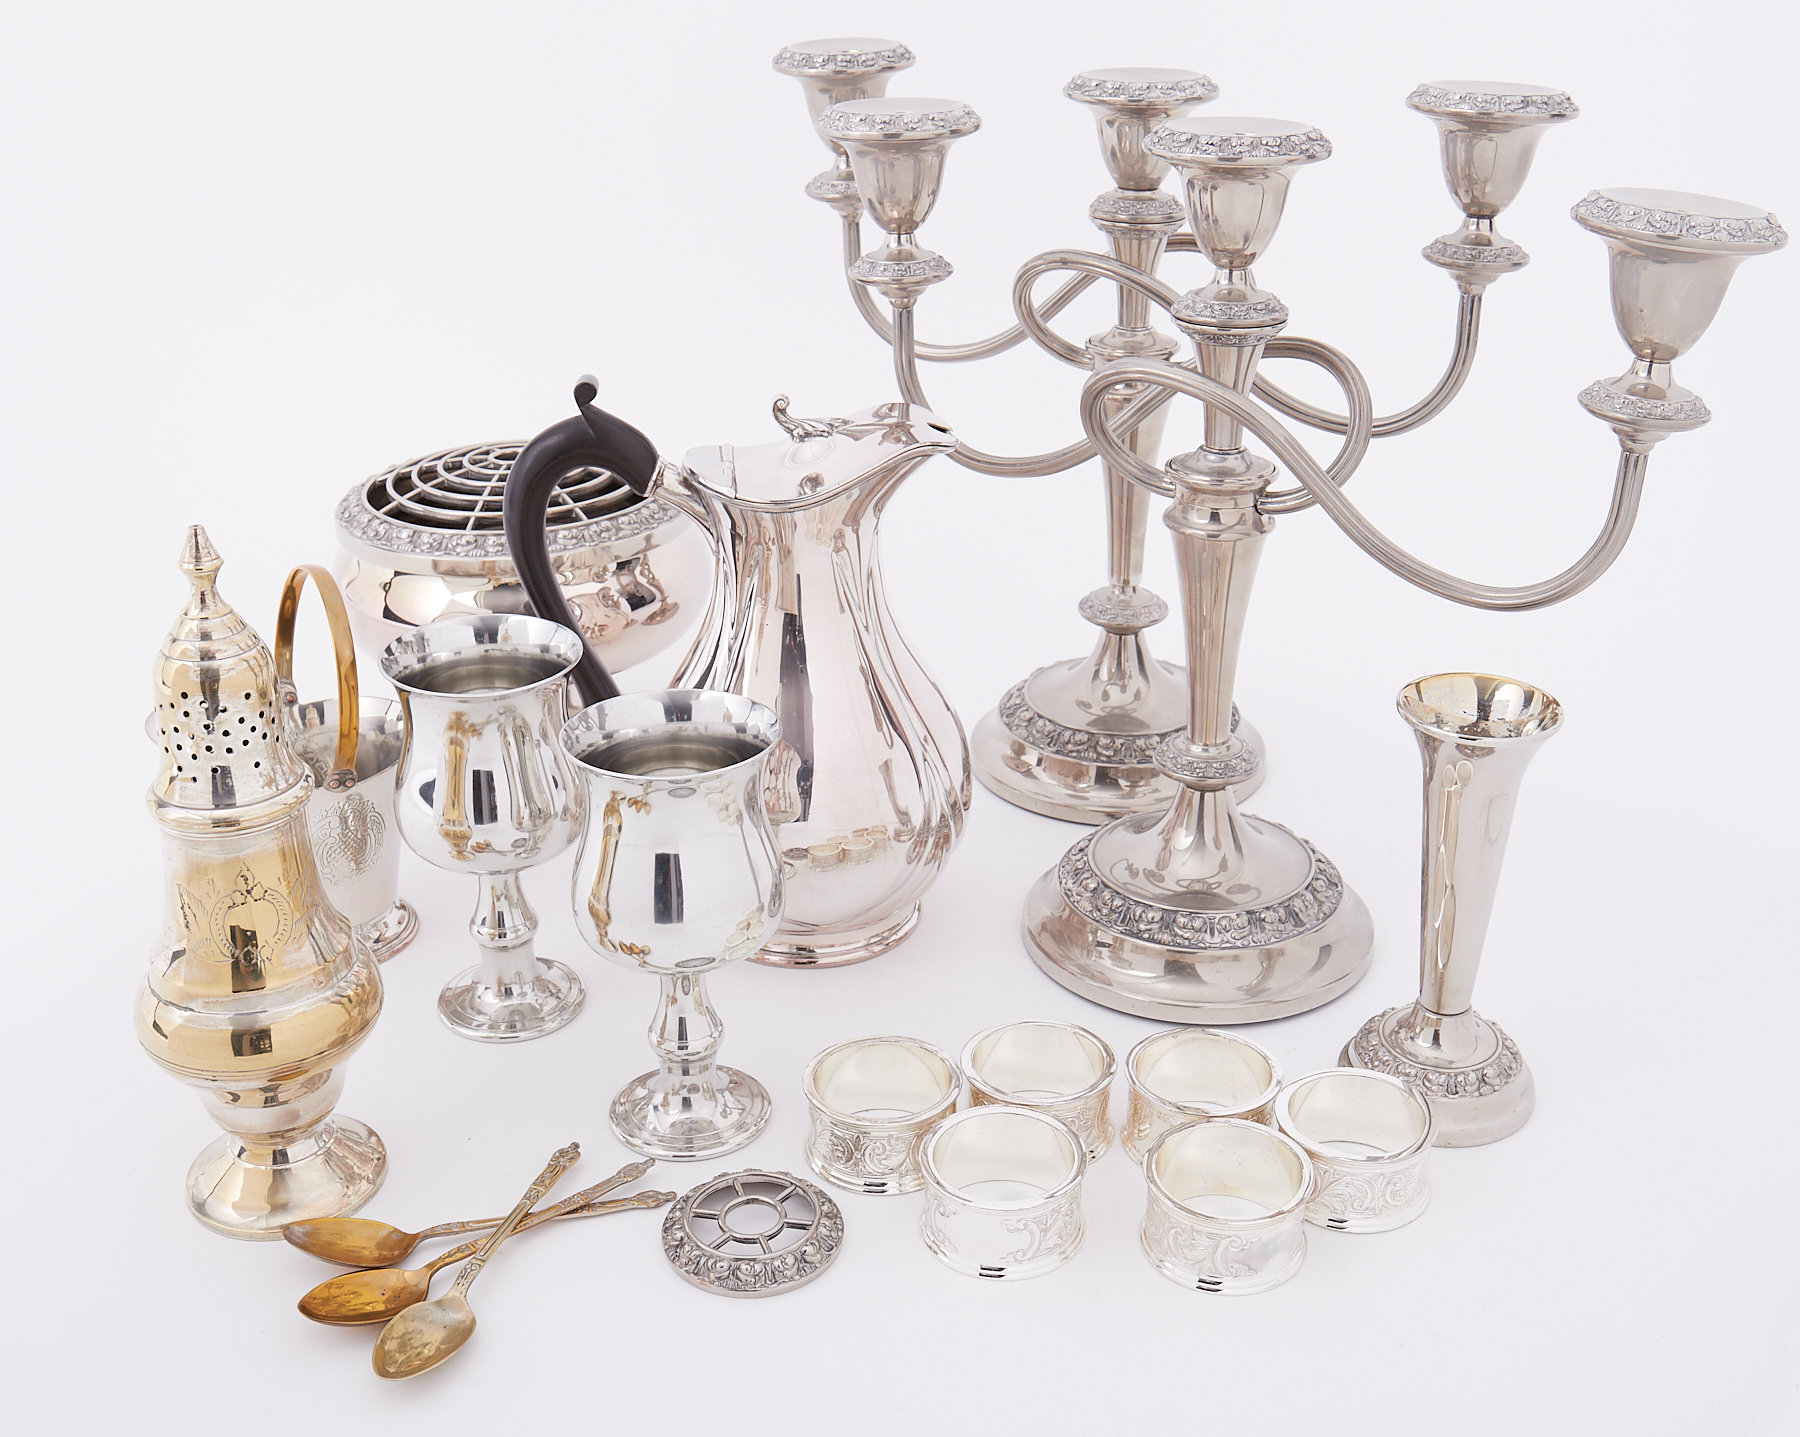 A small collection of silver plated wares including candelabra, napkin rings, sugar caster etc.